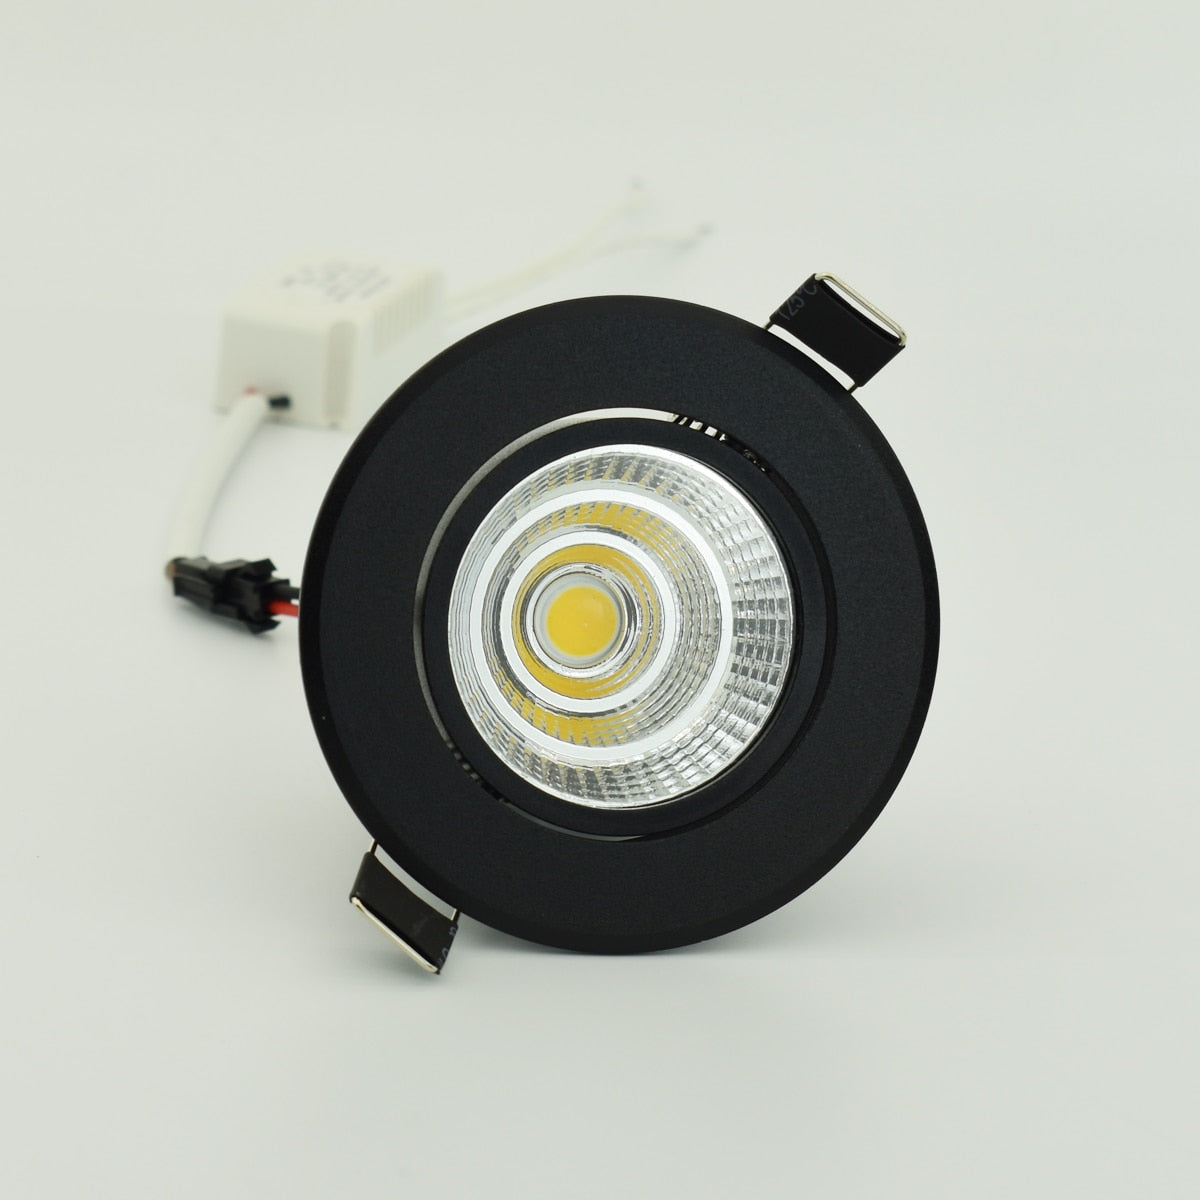 Special Black led spot Mini 3W 5W 7W COB LED Downlight Dimmable Recessed Lamp Light for ceiling home office hotel 110V 220V